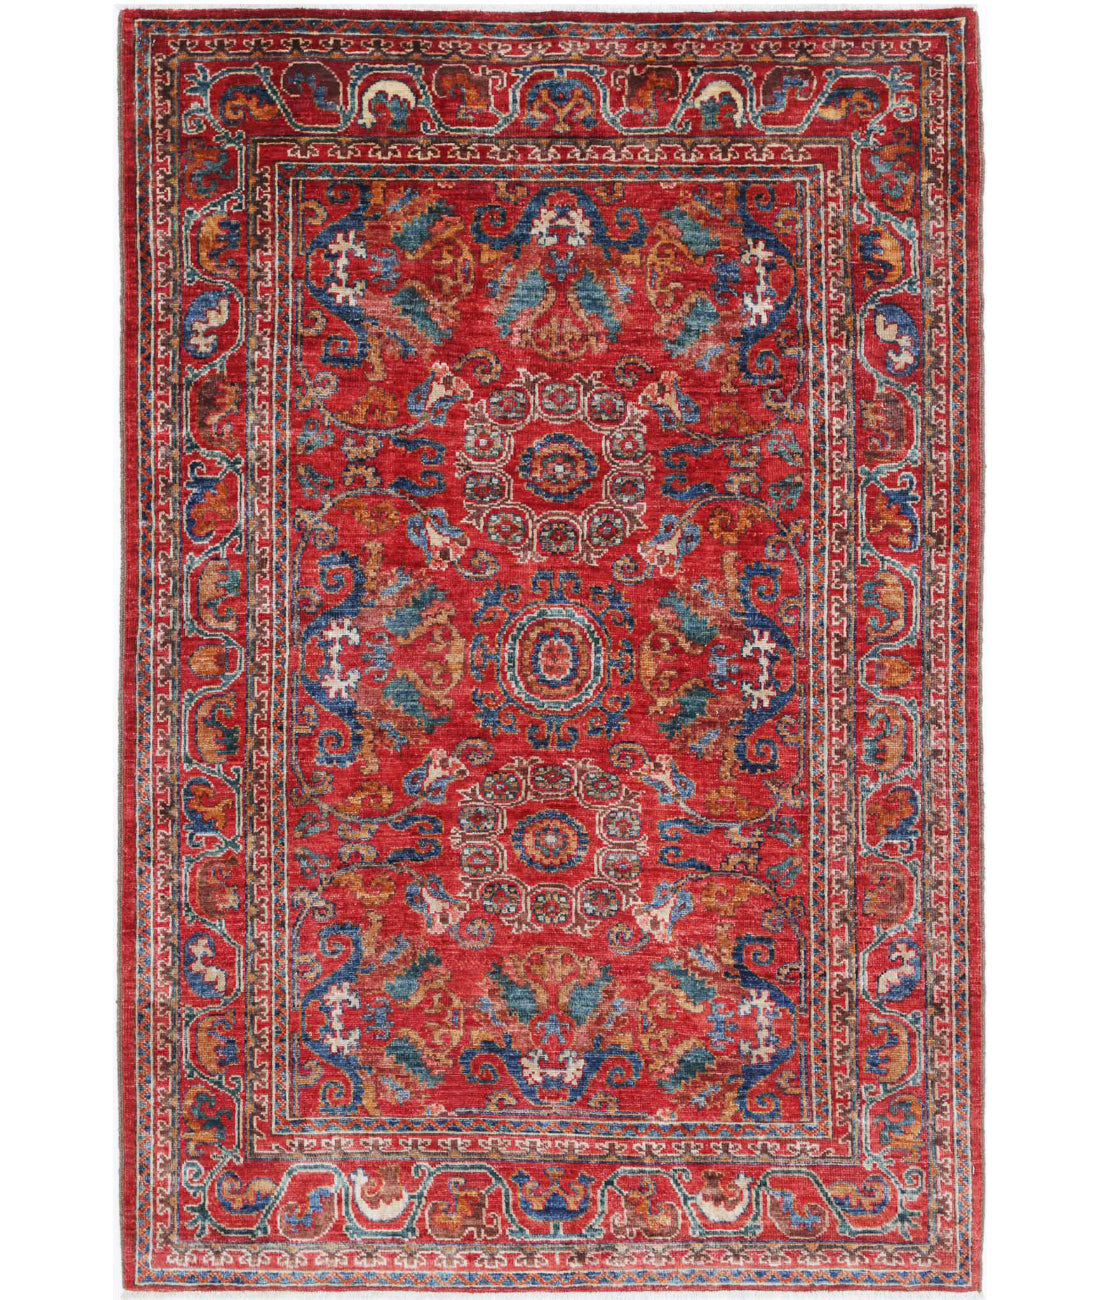 Hand Knotted Nomadic Caucasian Humna Wool Rug - 4'0'' x 6'1'' 4'0'' x 6'1'' (120 X 183) / Red / N/A